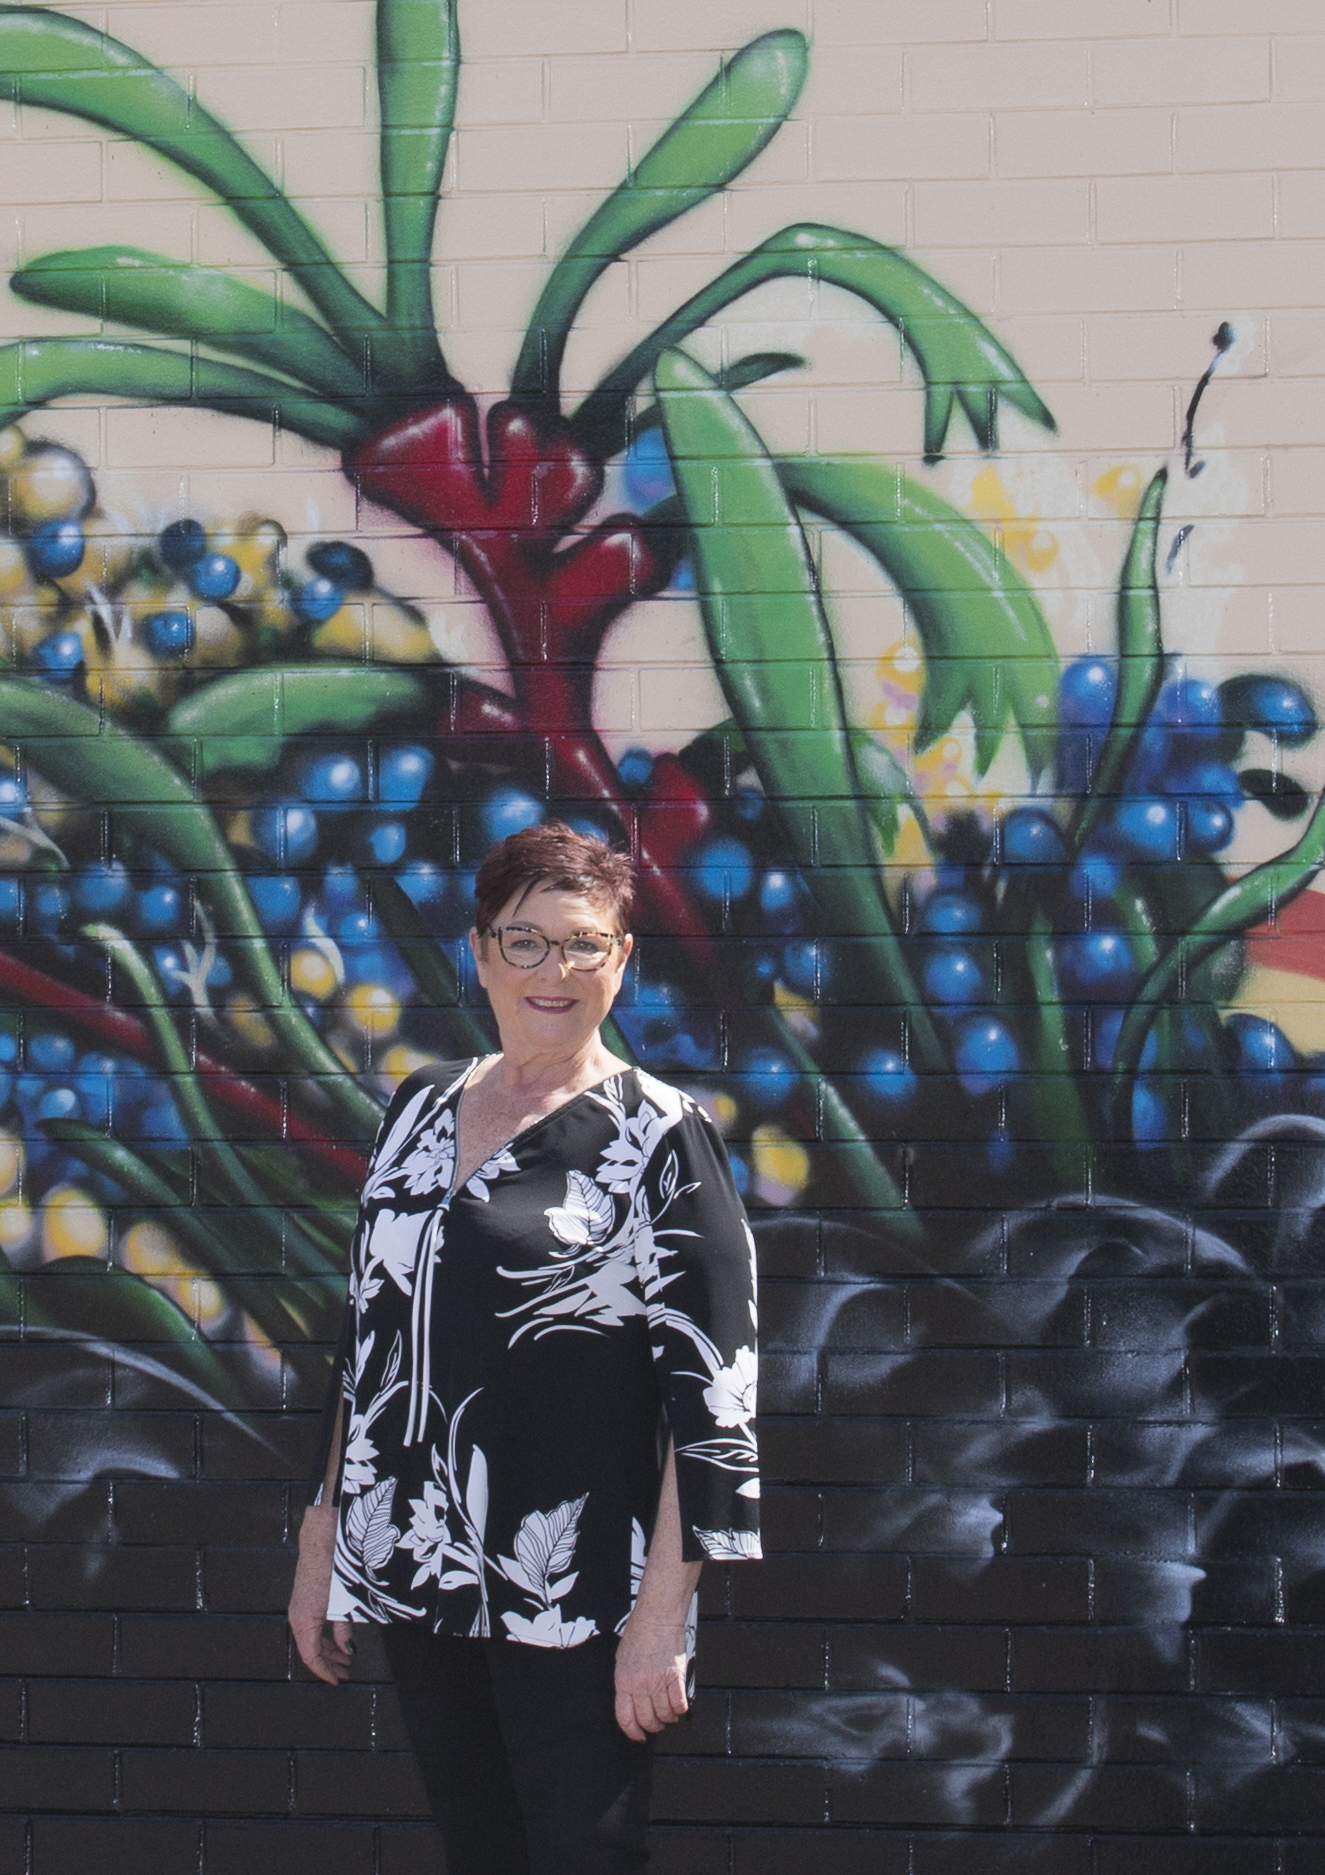 Lisa Baker MLA with street art in background. Art is of Red Kangaroo Paw and part of a Black Swan